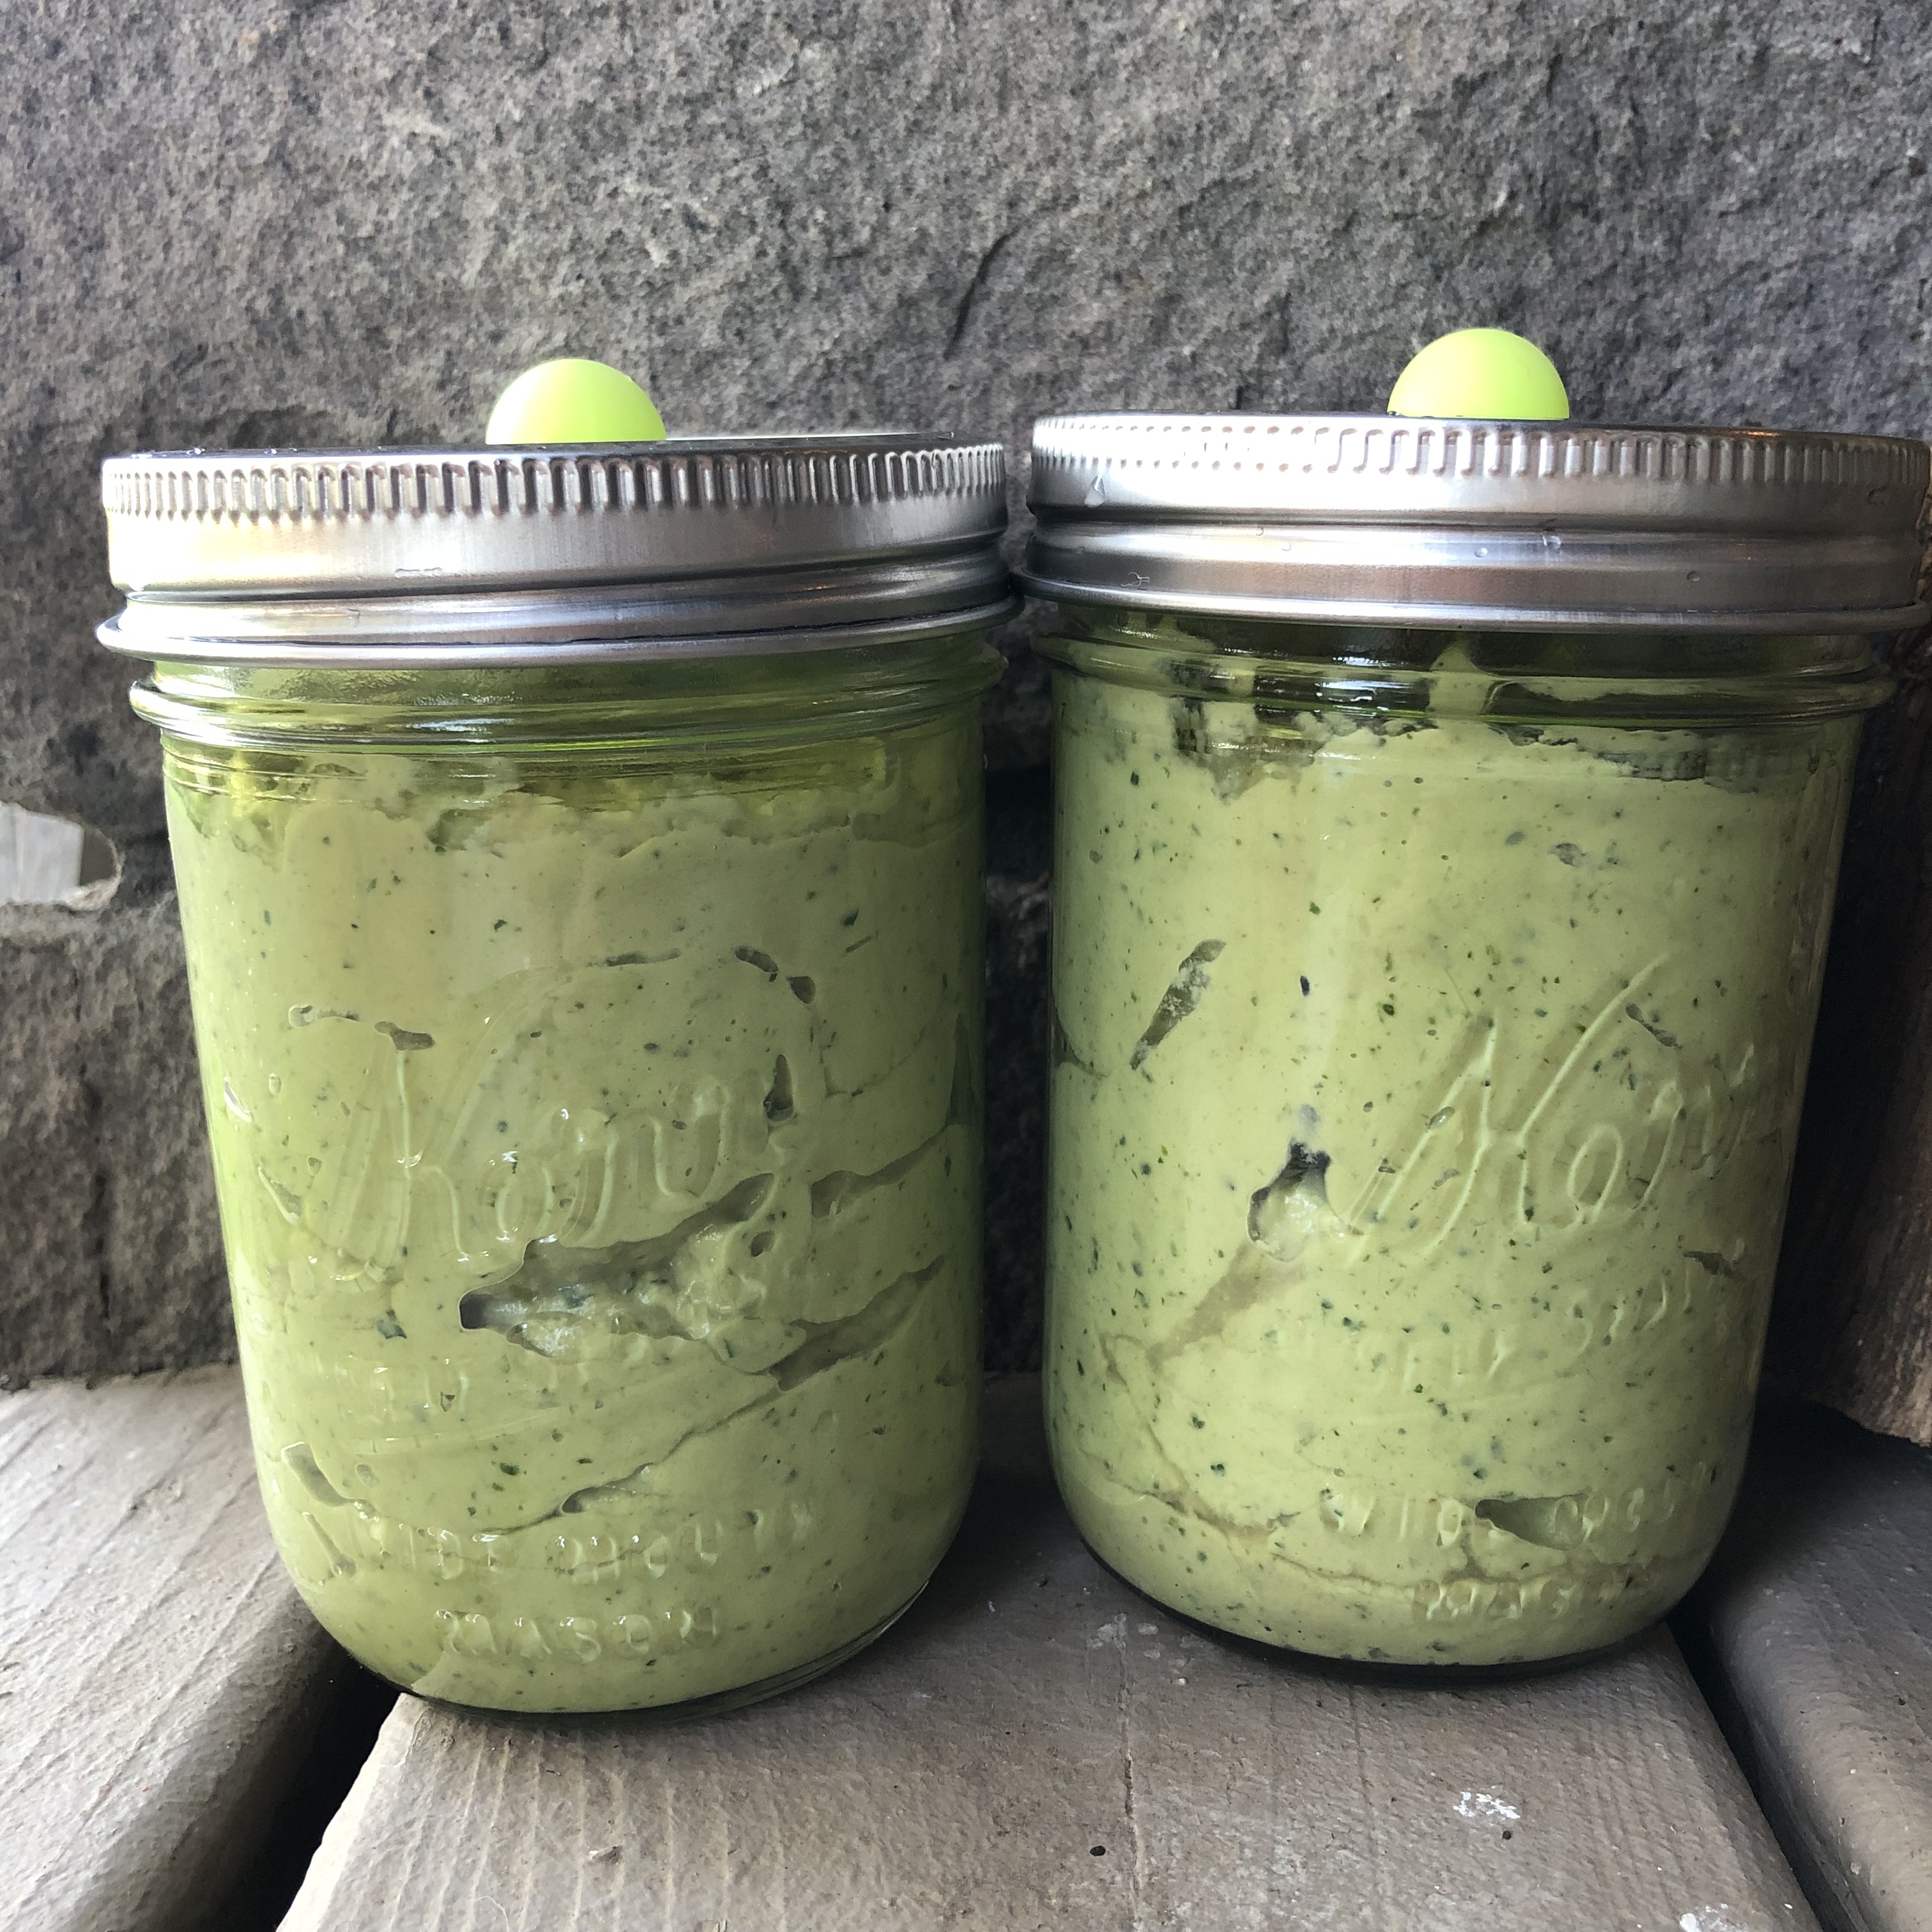 Cultured Kefir Guacamole (keto with vegan and paleo options)